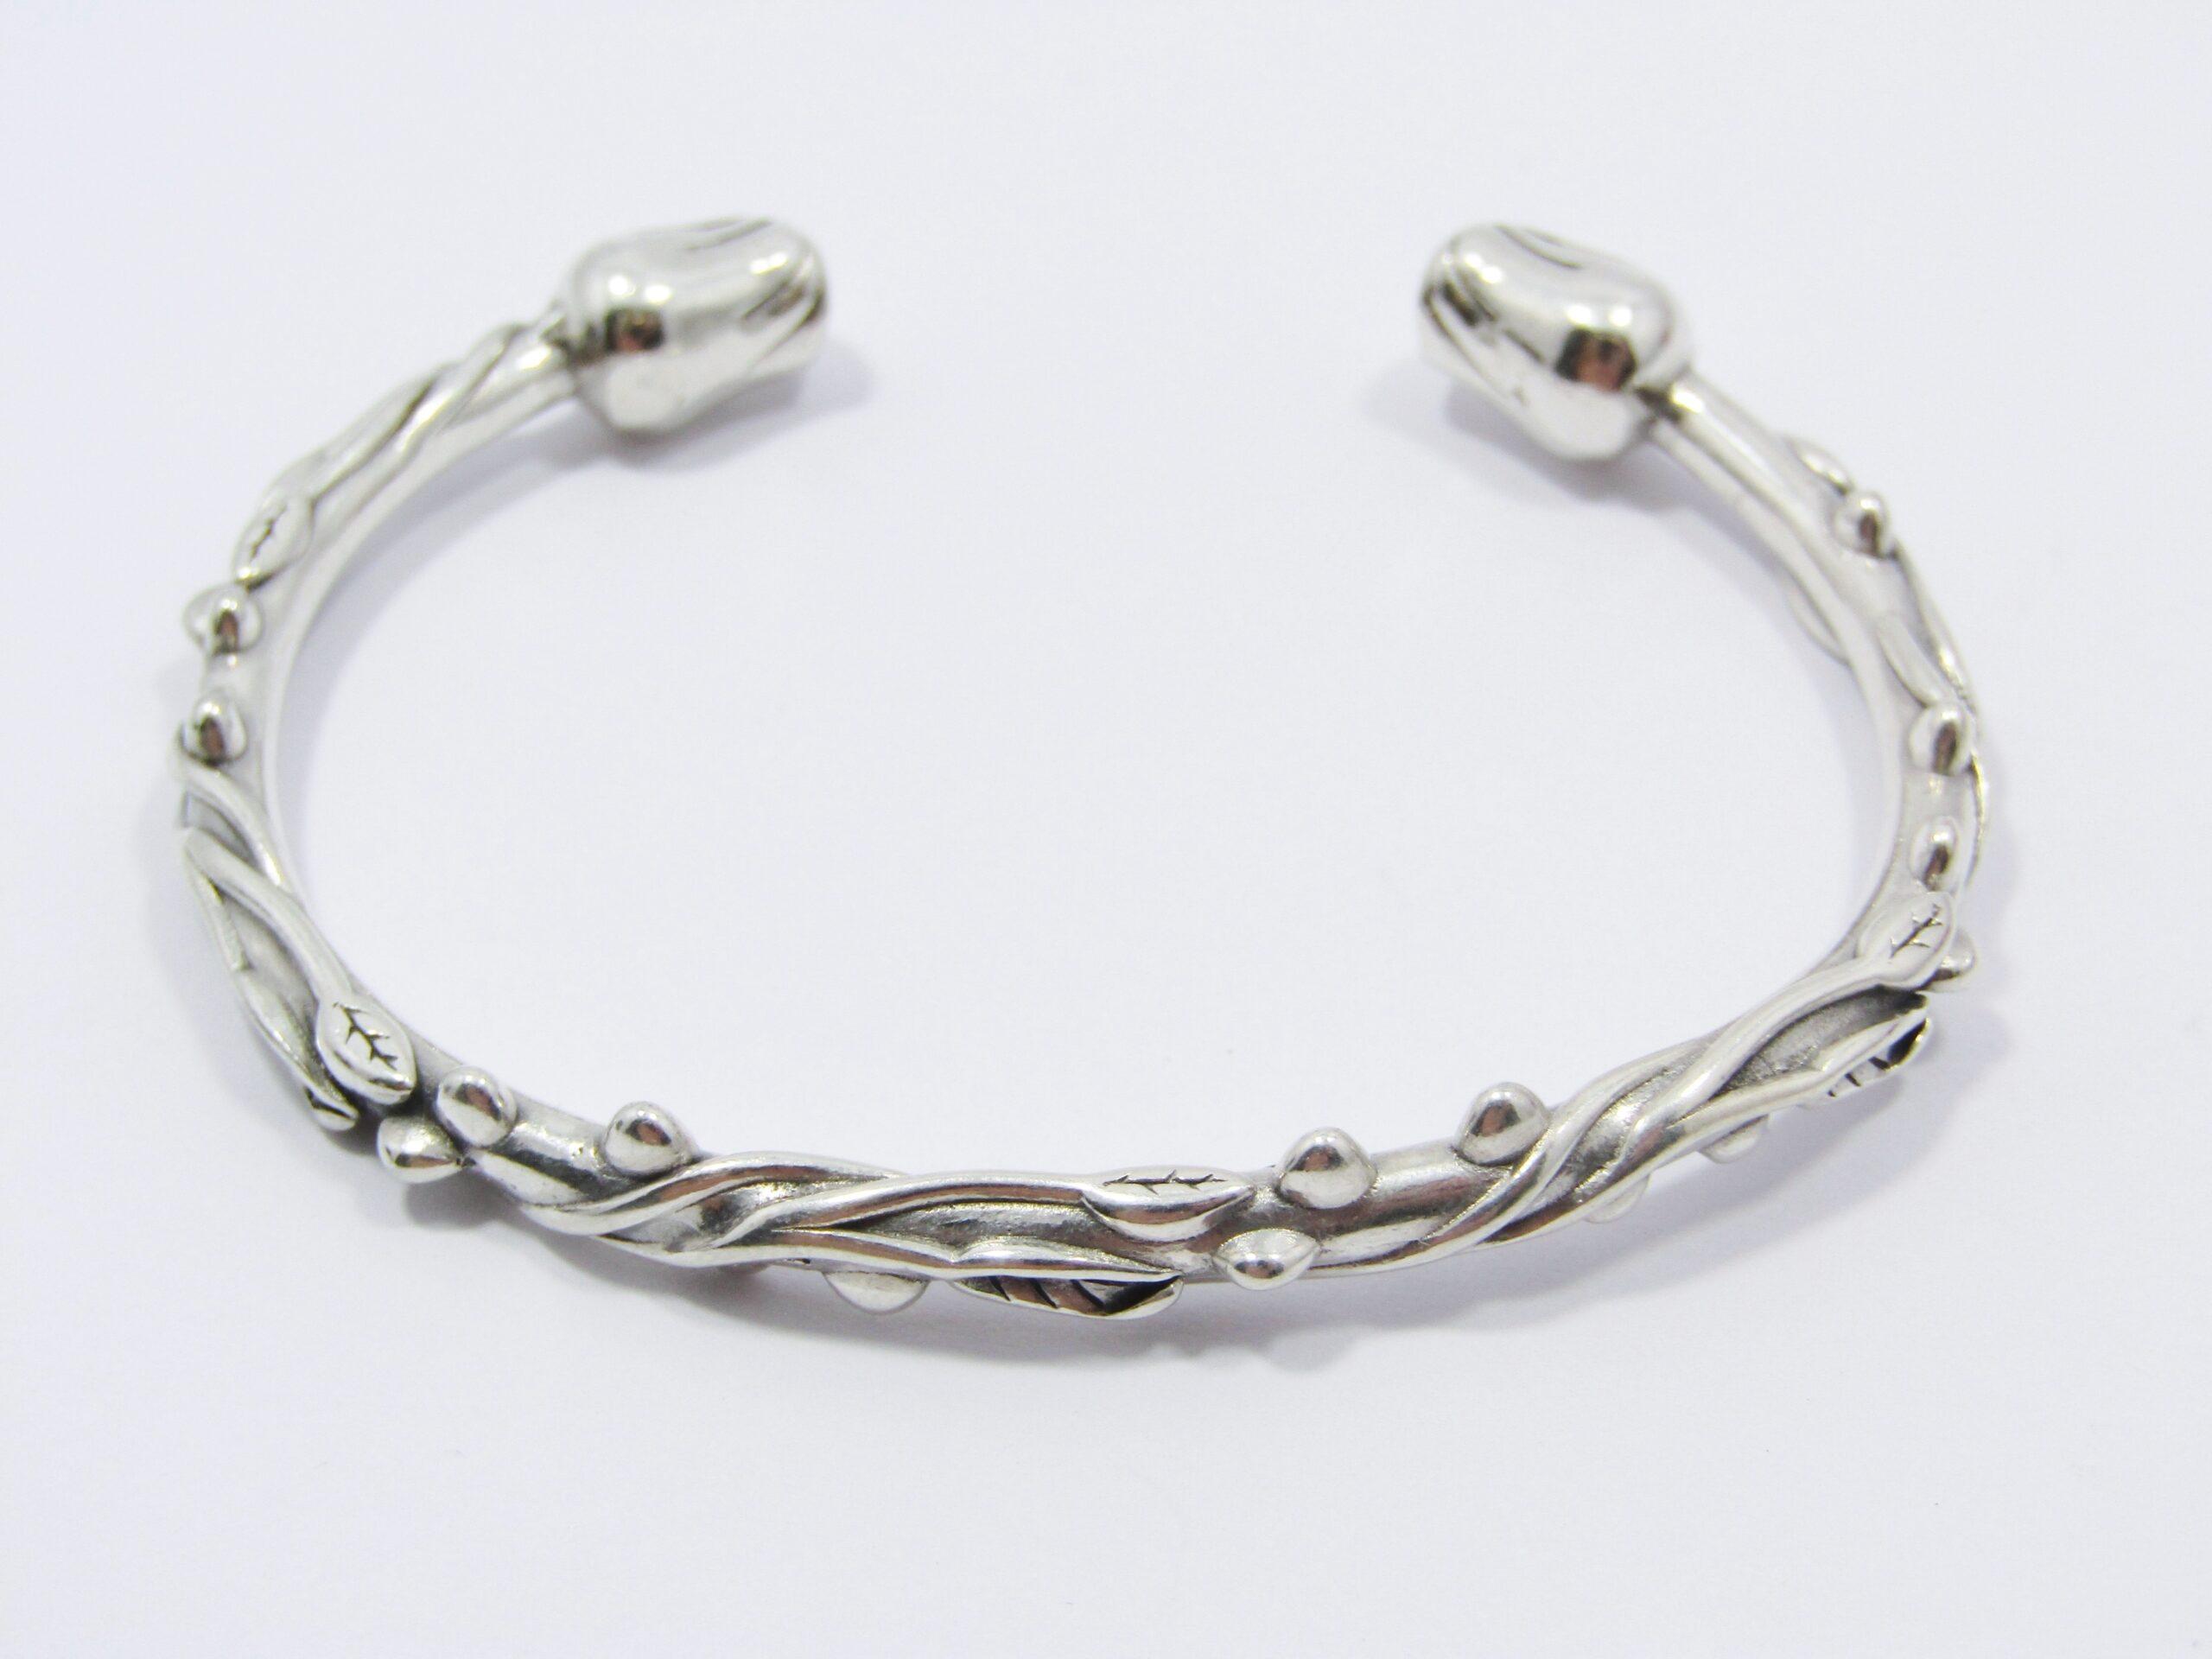 A Gorgeous Bespoke Cuff Bangle Depicting Two Stems of Roses in Sterling Silver